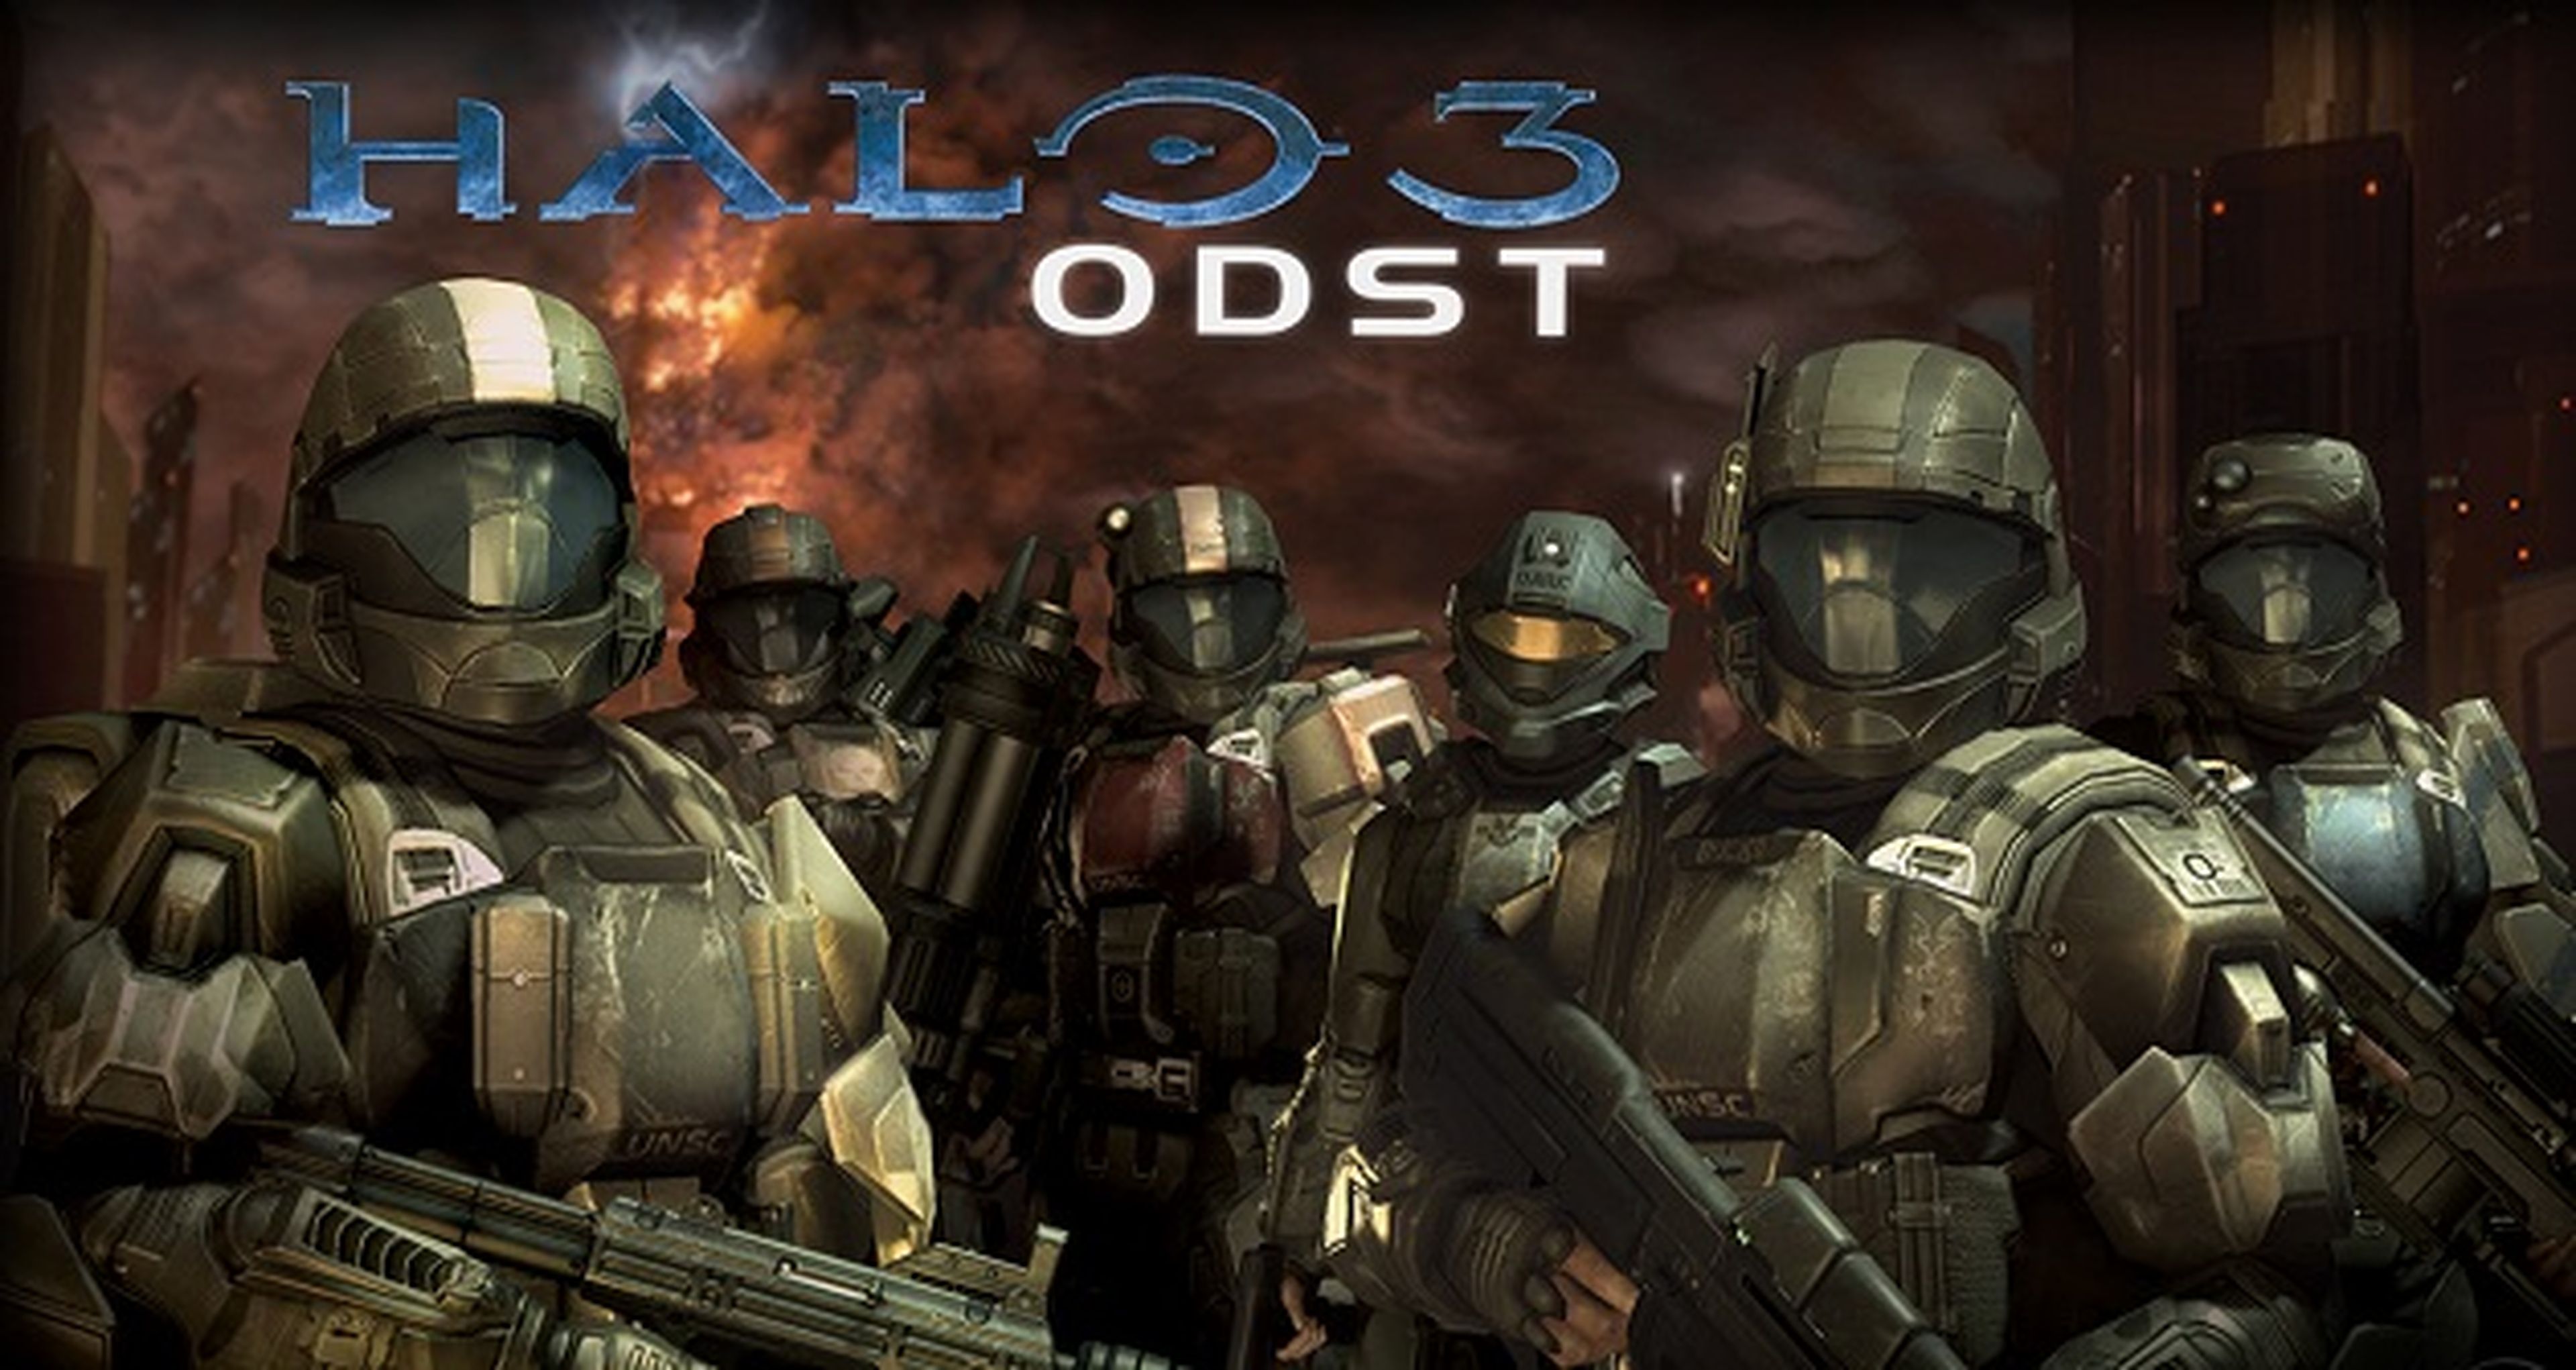 Halo The Master Chief Collection: Ya disponible Halo 3 ODST